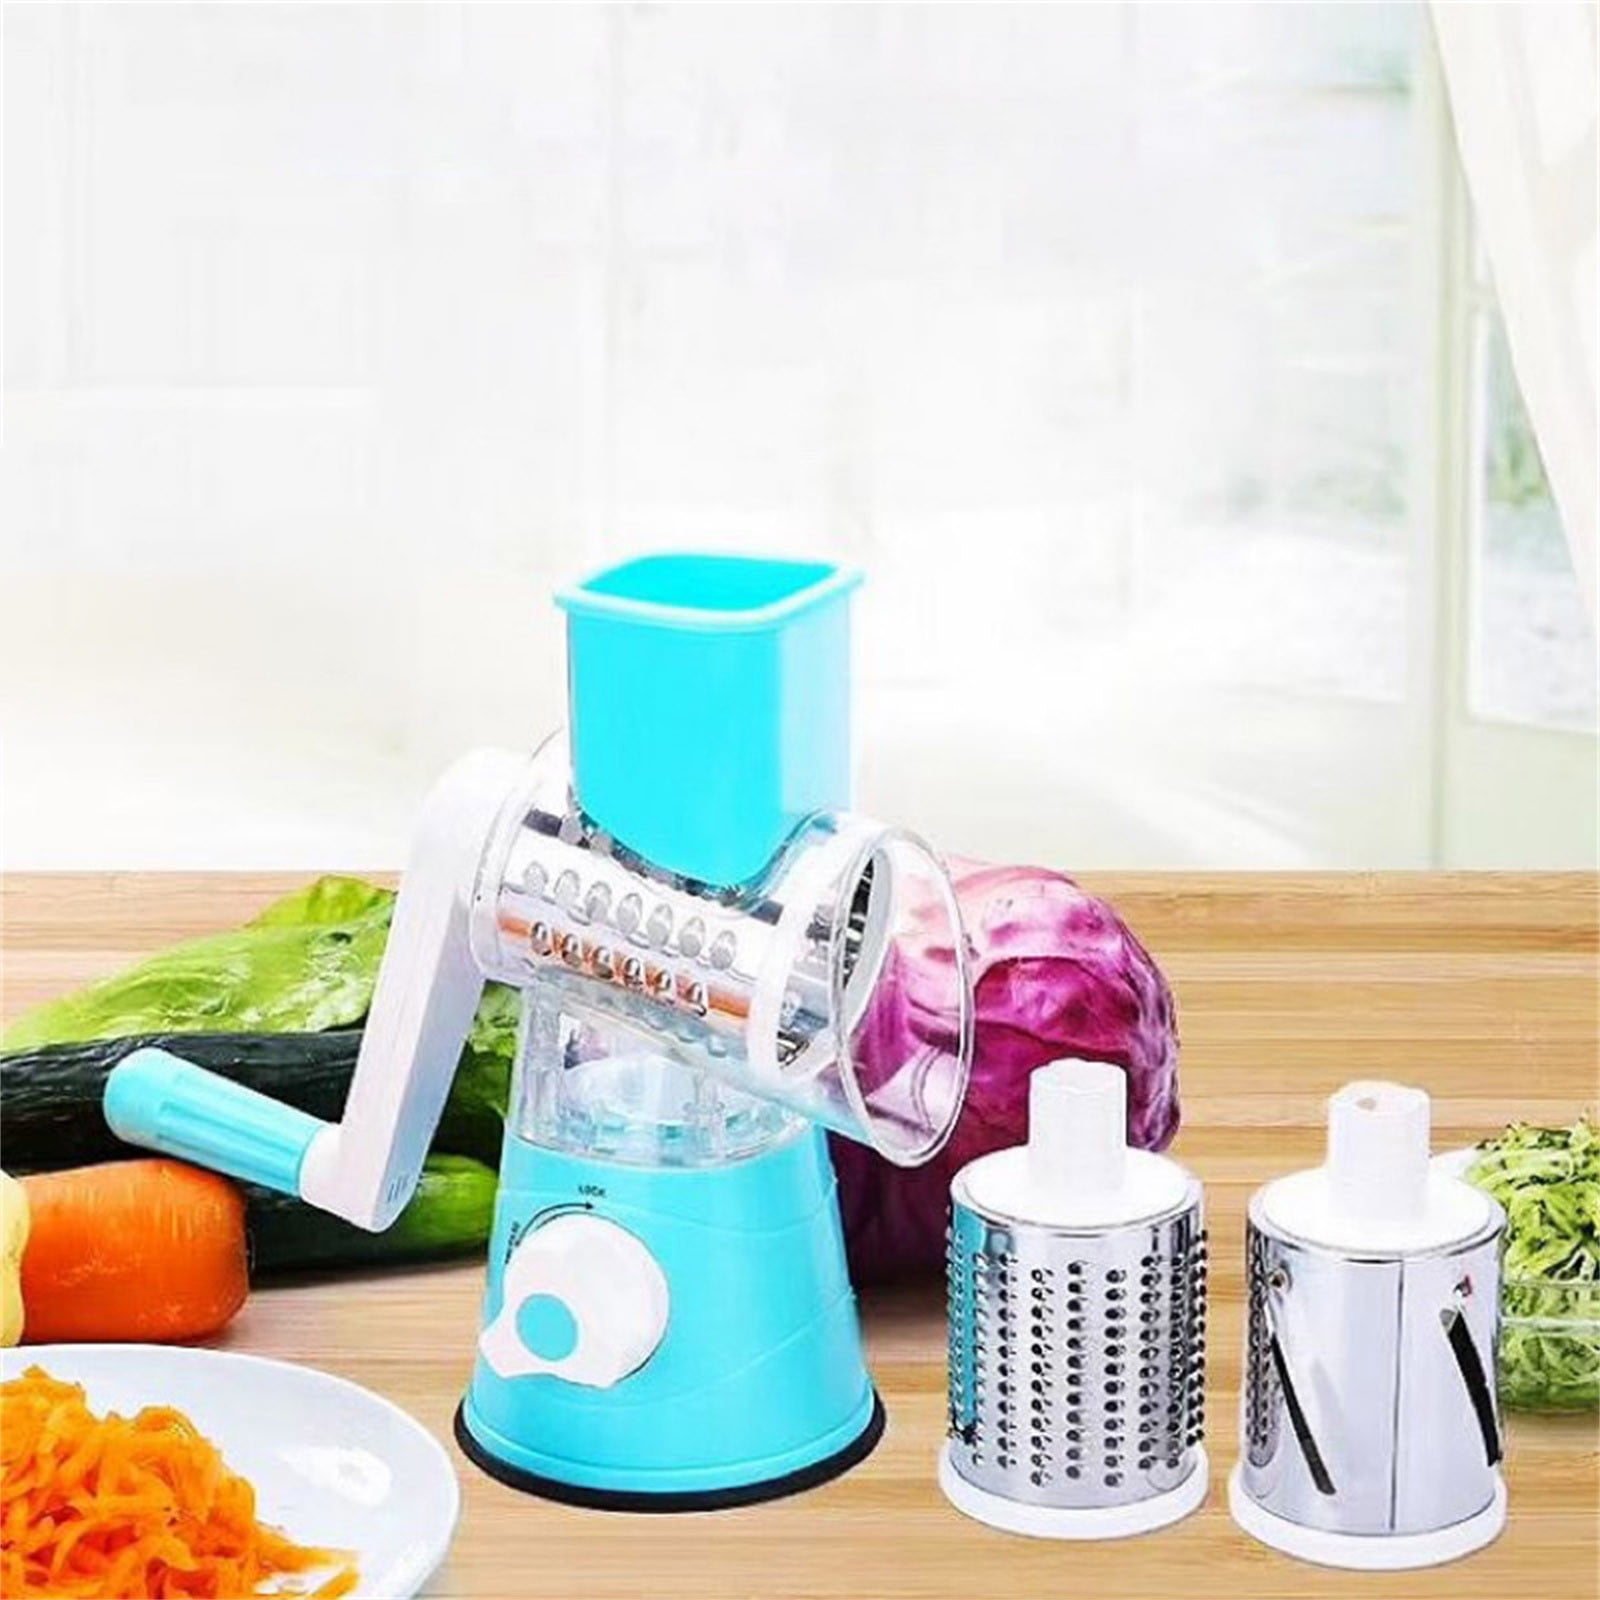 World of Confectioners - Rotary vegetable slicer 3in1 - Kitchen utensils